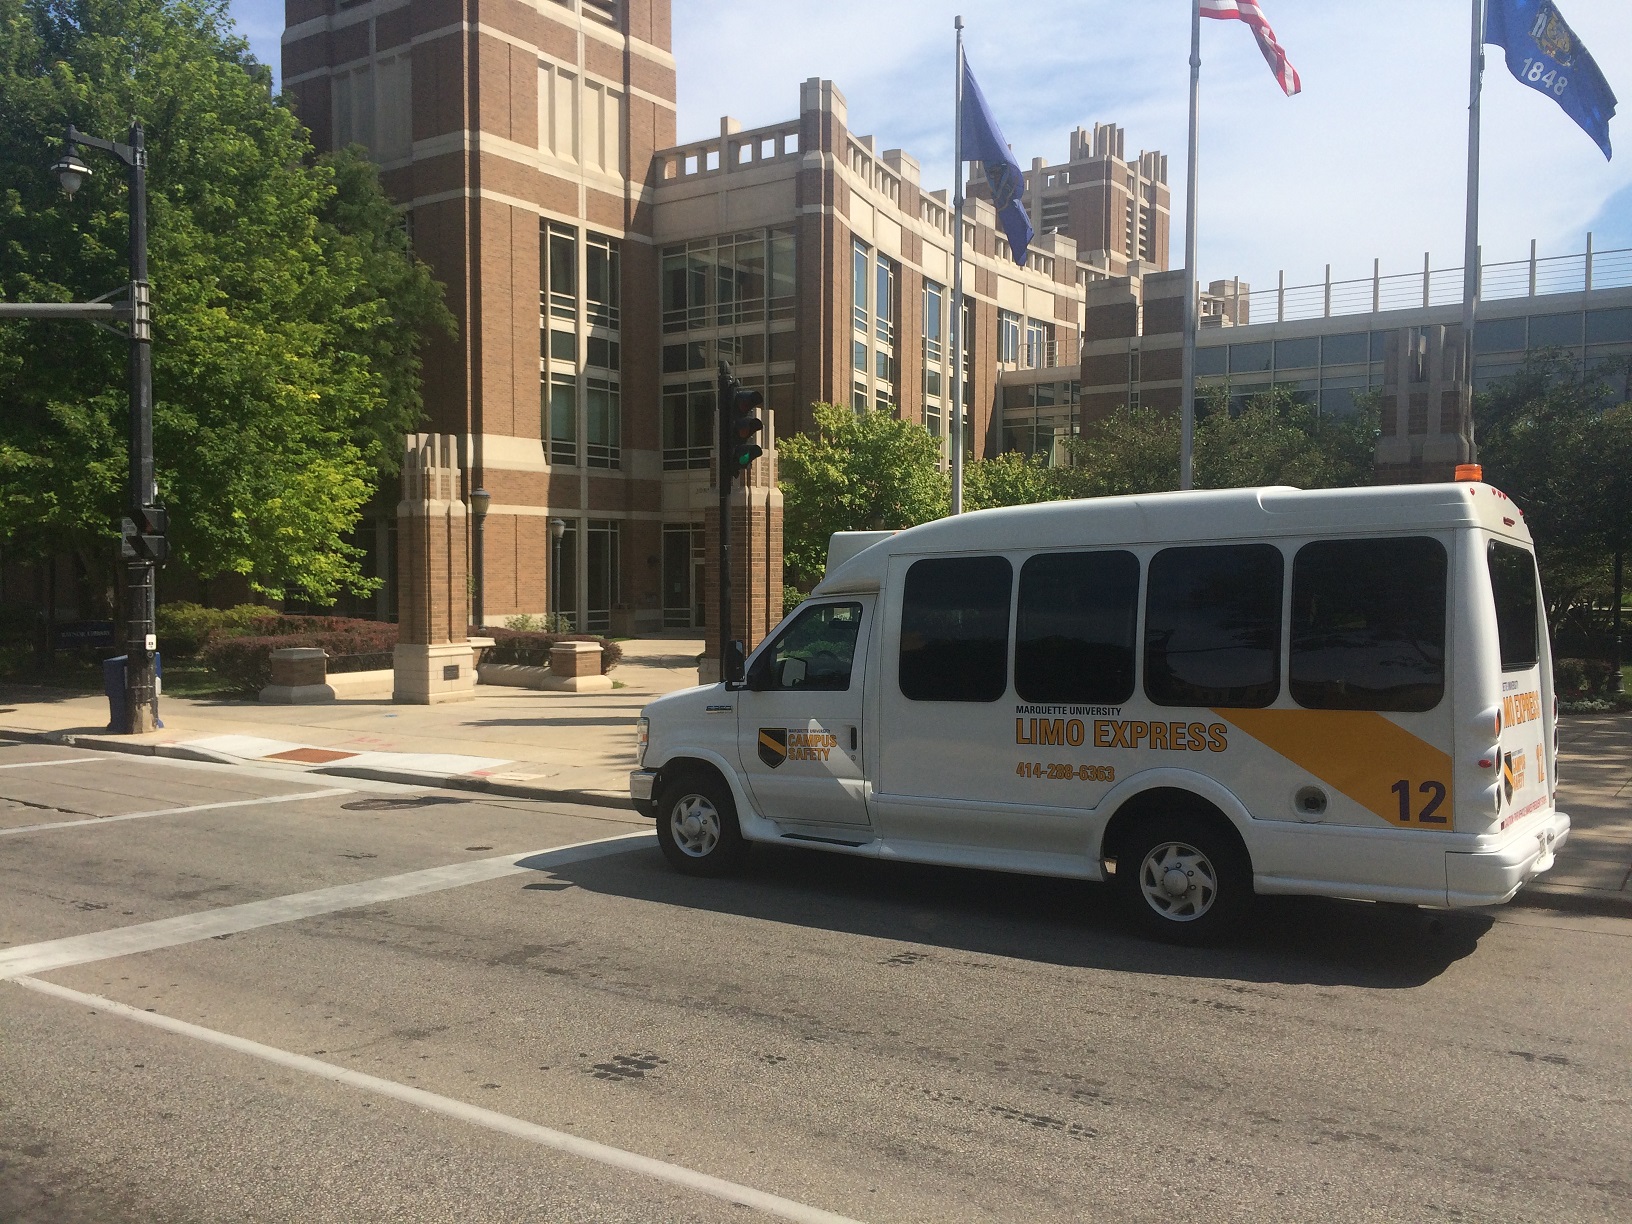 LIMO Express outside of Raynor Library